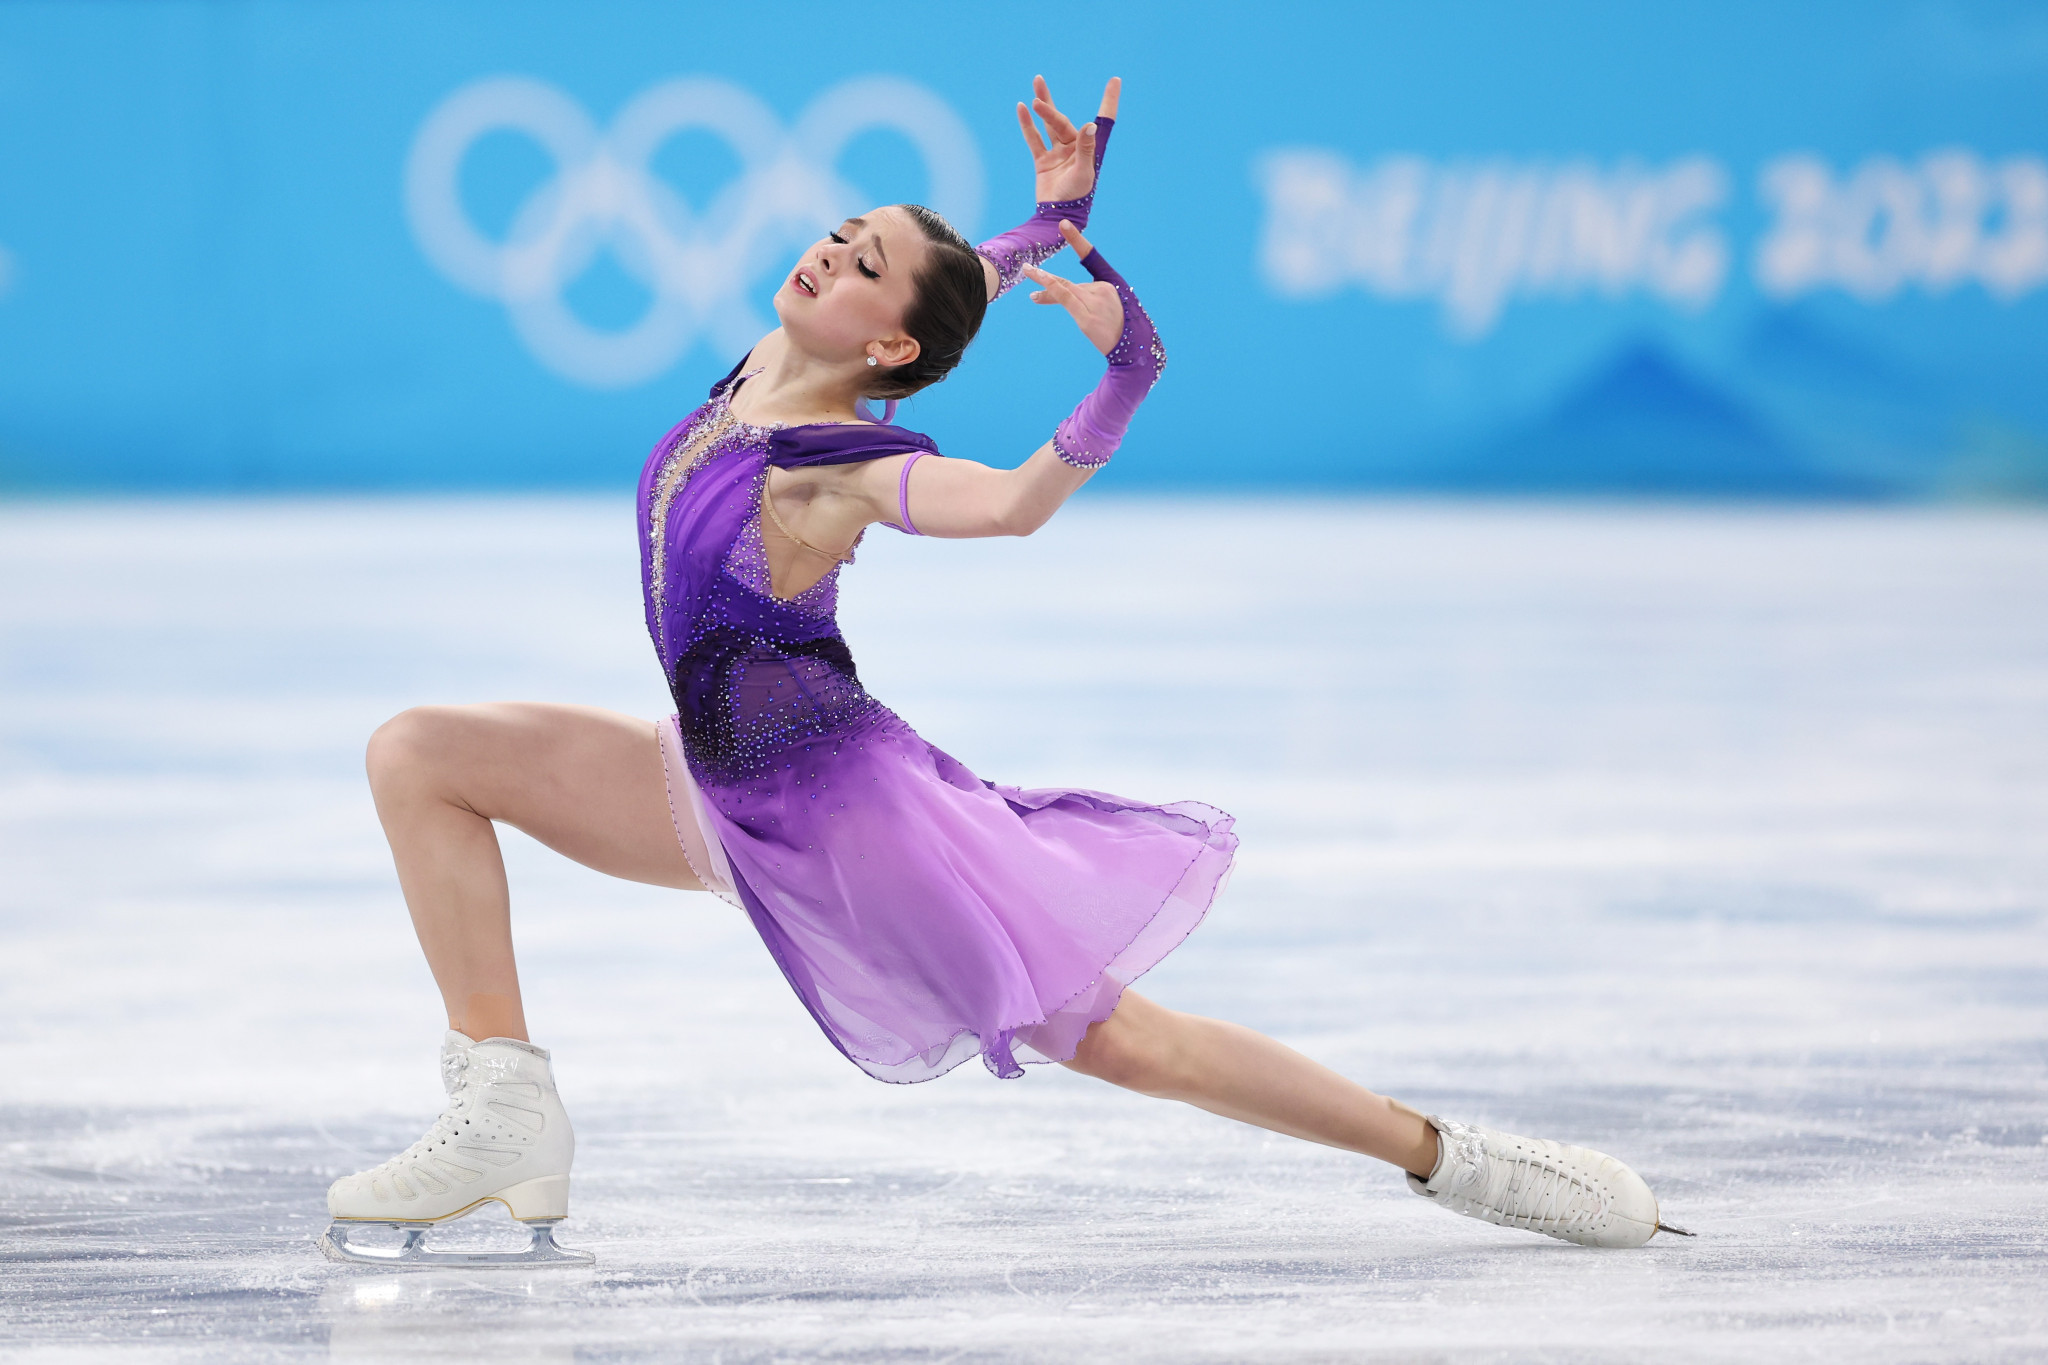 RUSADA has insisted it "did not delay the processing of the results at any stage" of the investigation into Russian figure skater Kamila Valieva ©Getty Images